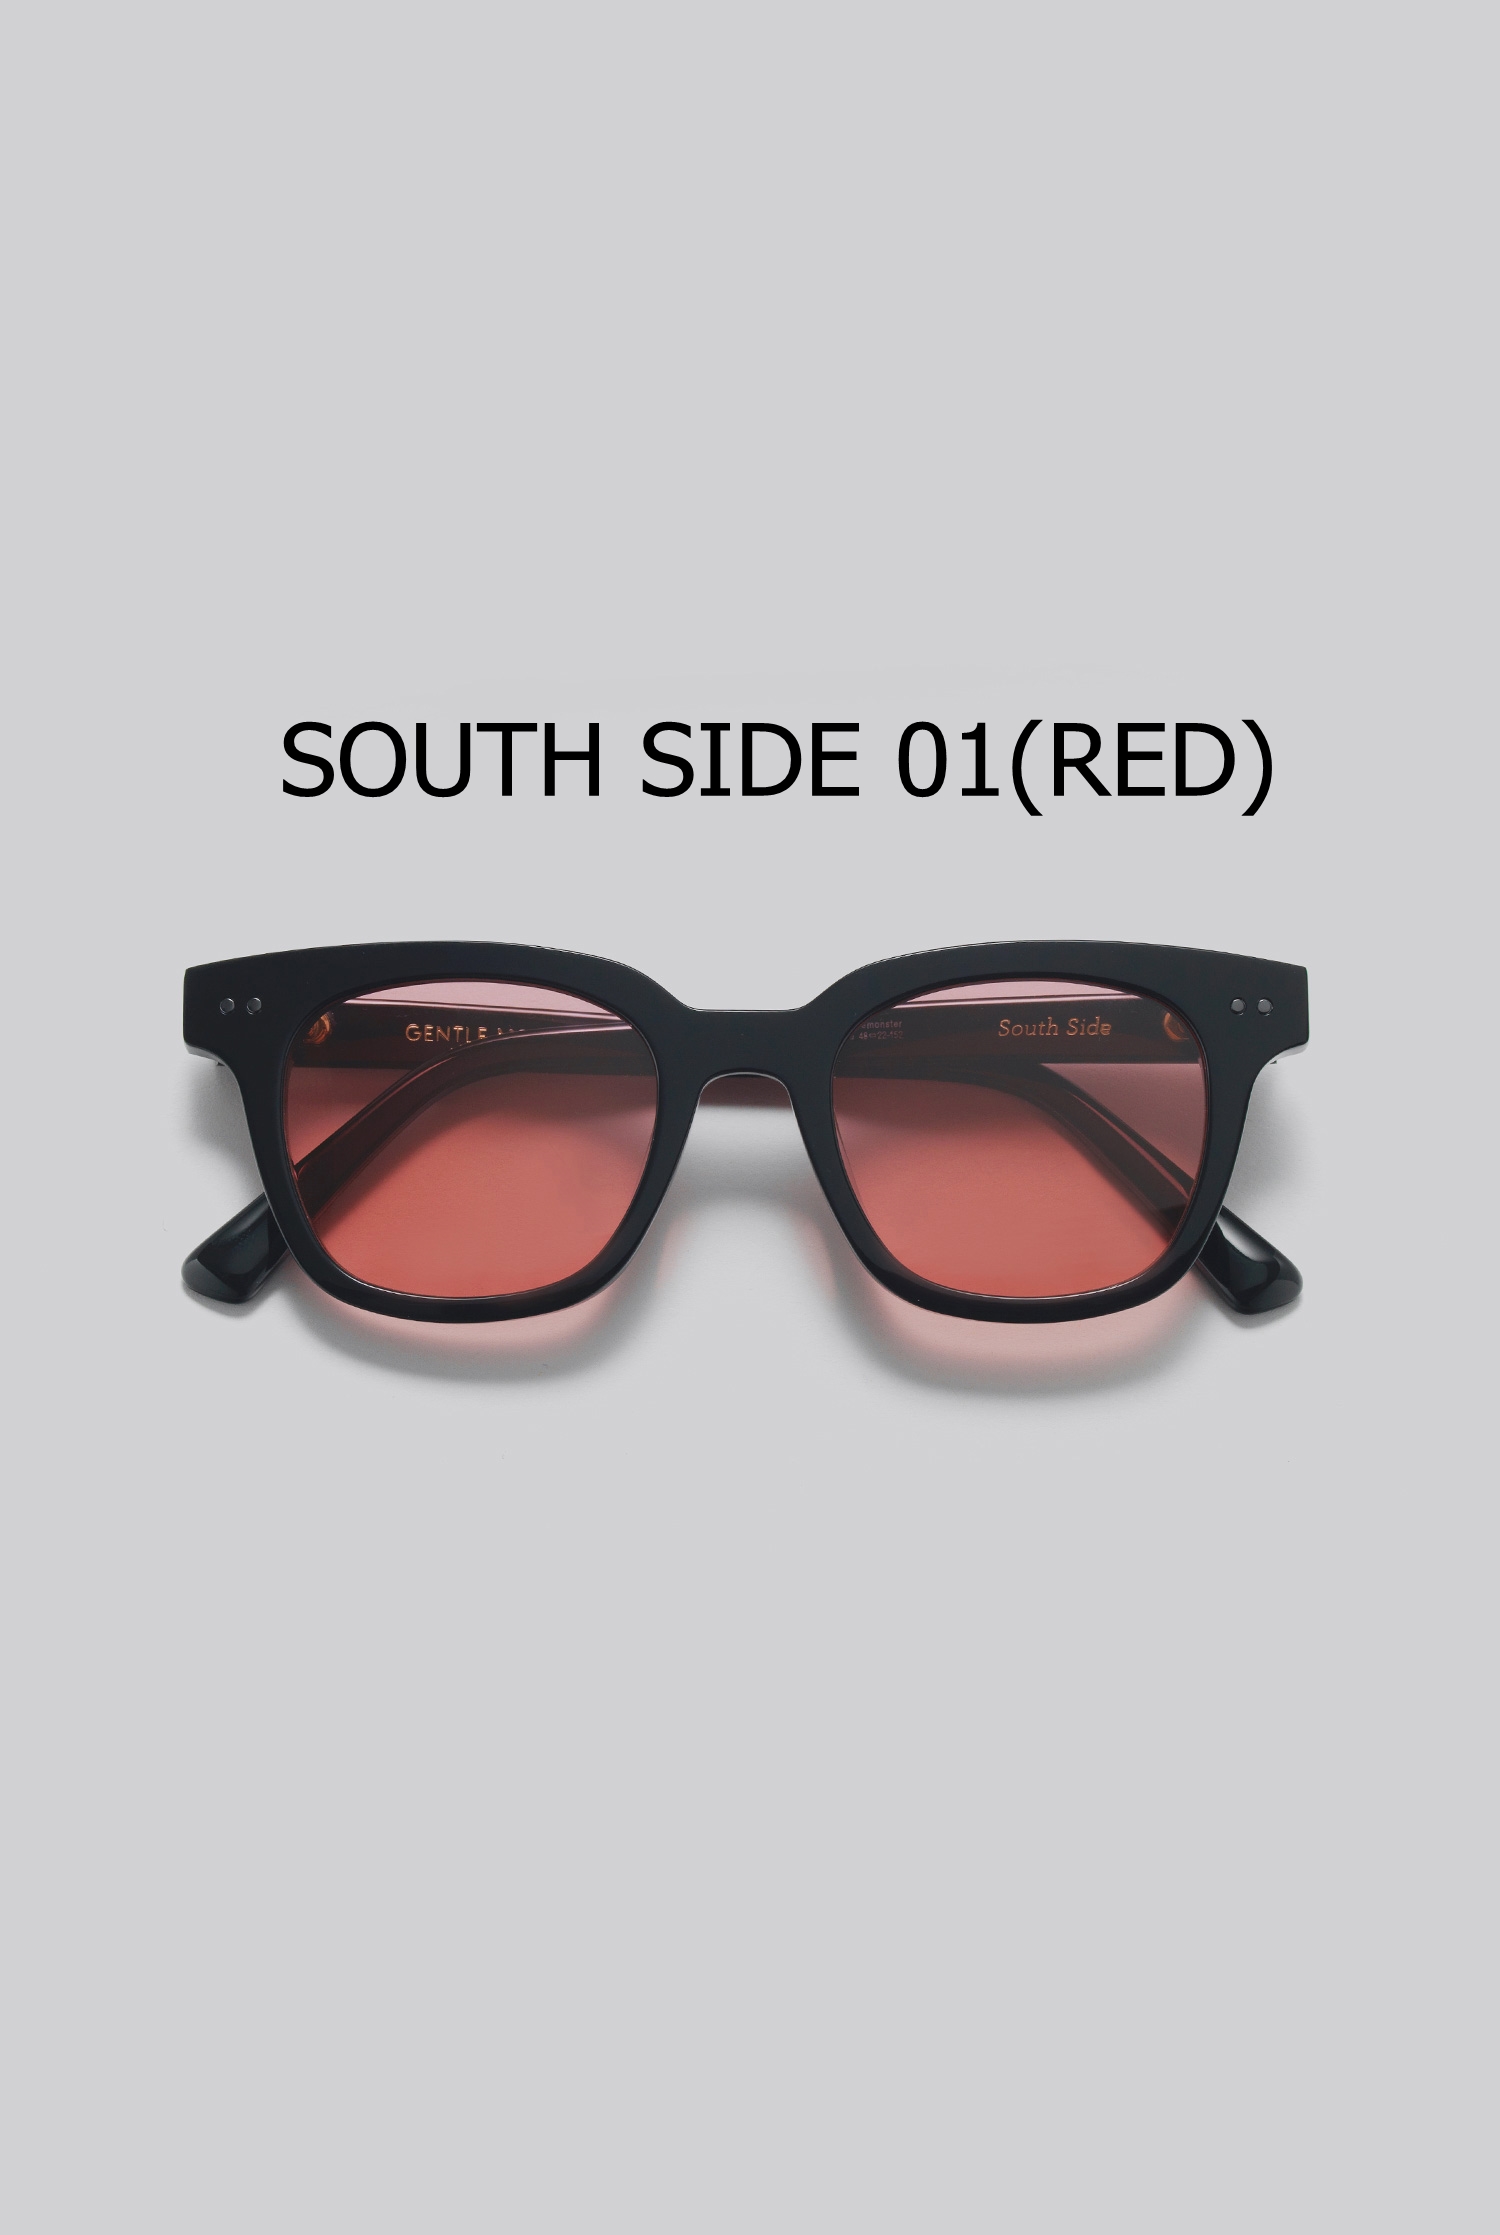 SOUTH SIDE 01(RED)